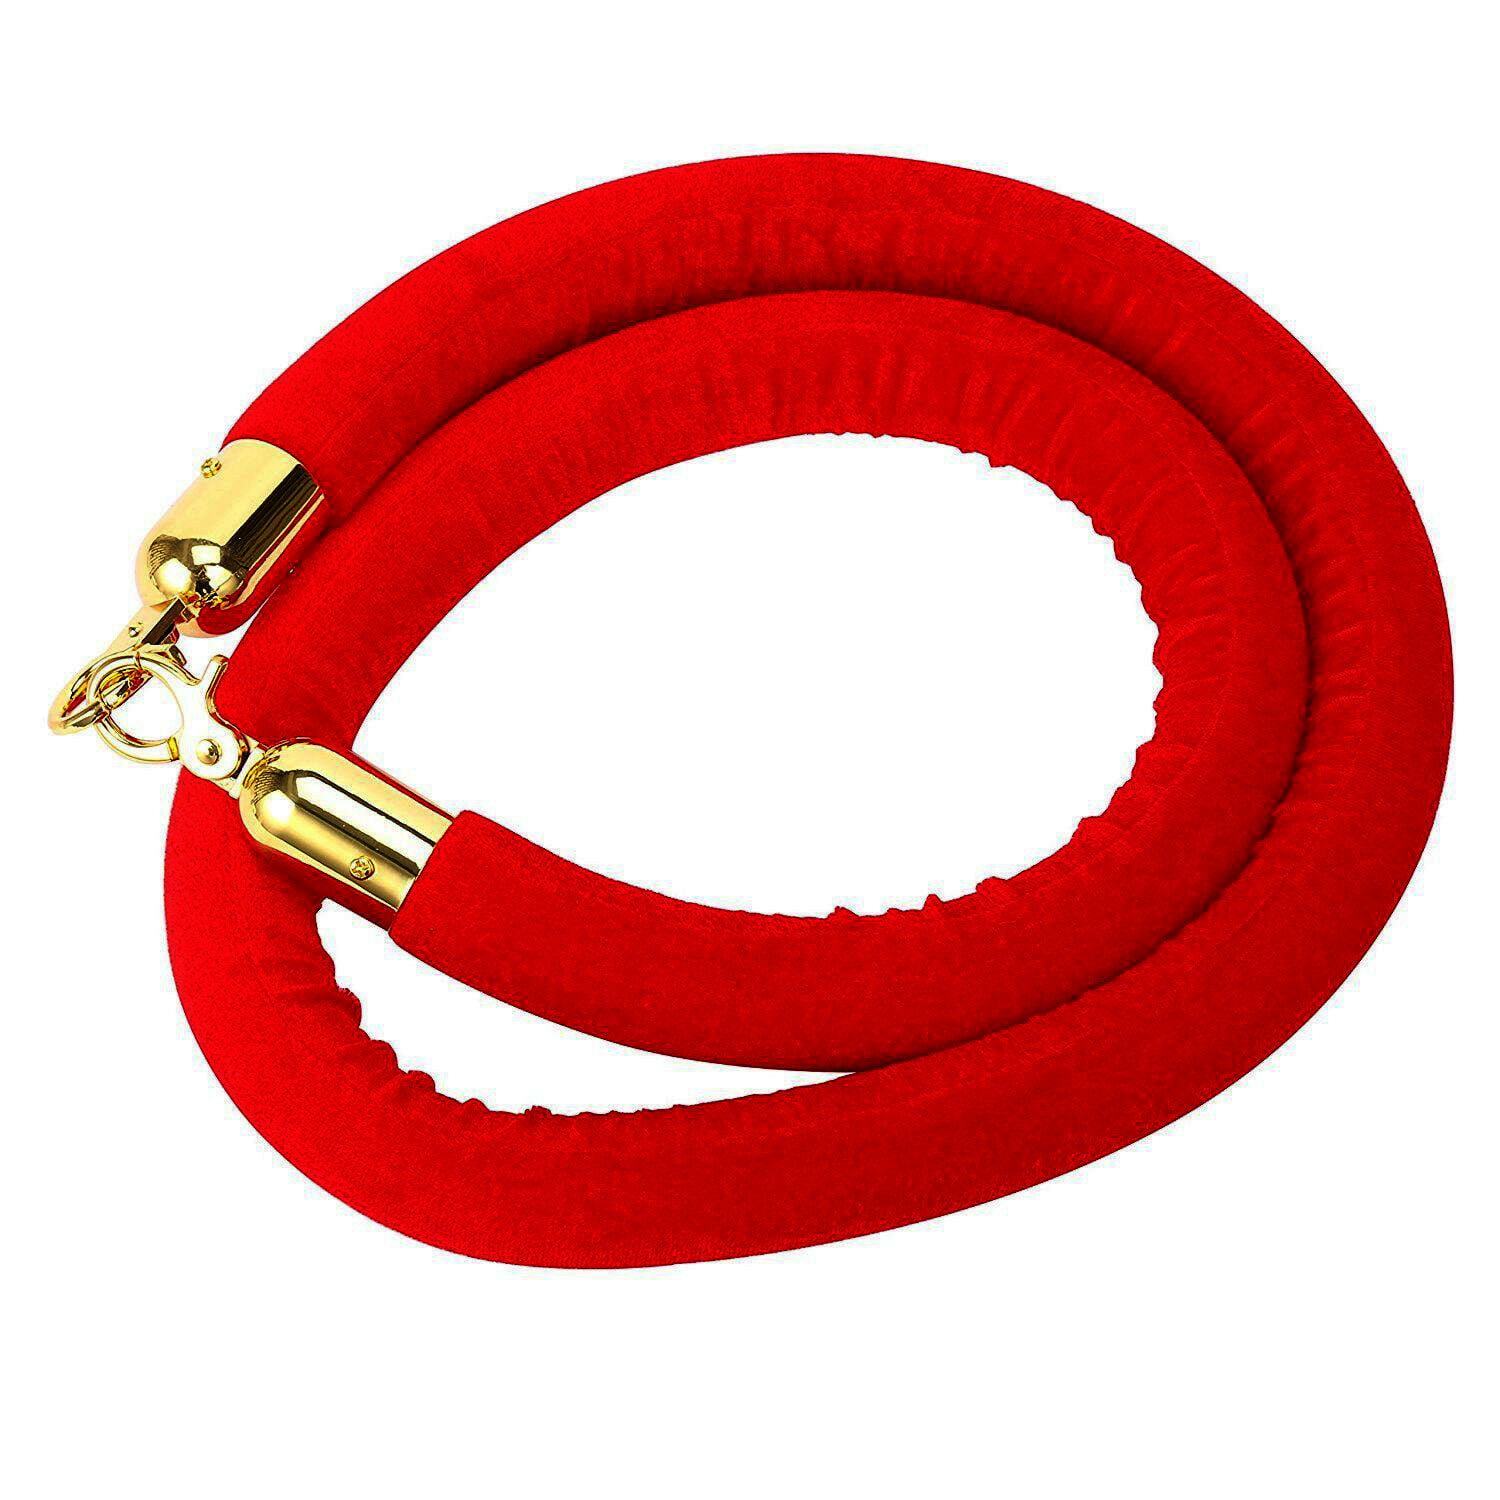 Red Velvet Stanchion Rope Crowd Control Rope Barrier with Chrome Plated Hooks 1pcs, Gold Hooks KEAIDUO 5Ft Thick Stanchion Queue Barrier Rope 